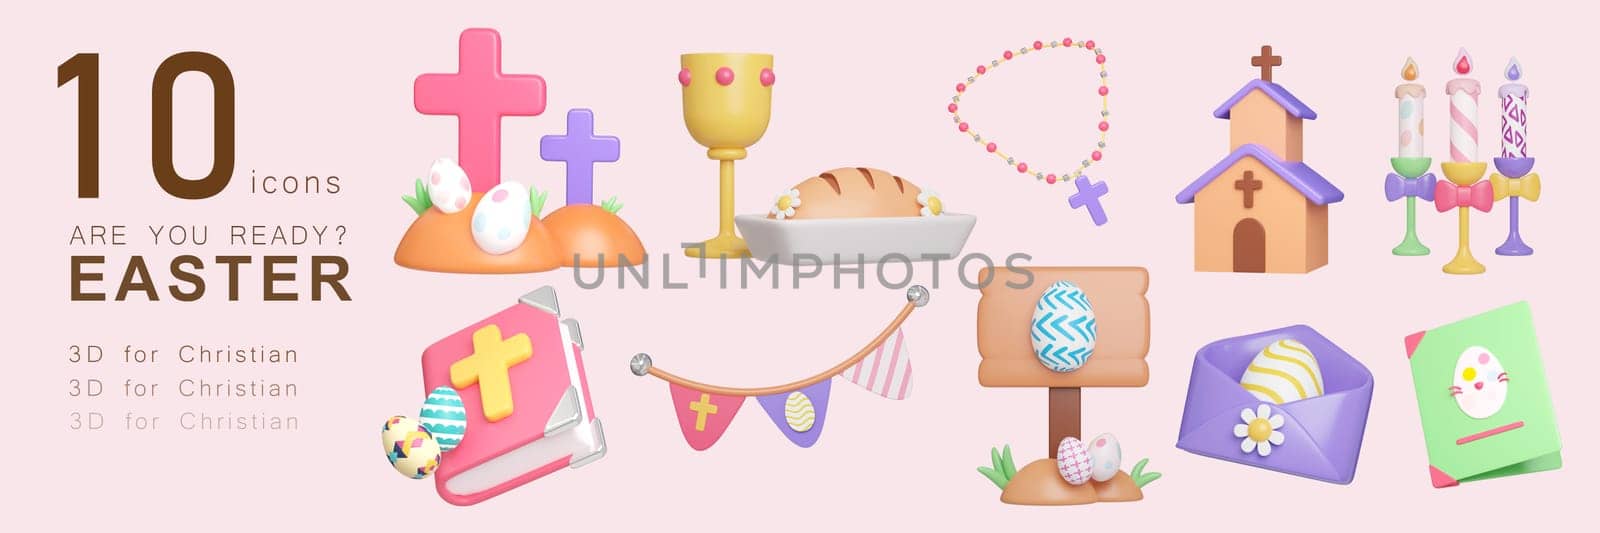 3D illustrated cute festive set of christian icons. cross, chaliace, bread, candle, book, envelope, sign, basket, candy, art, 3D Illustration Easter festive. by meepiangraphic